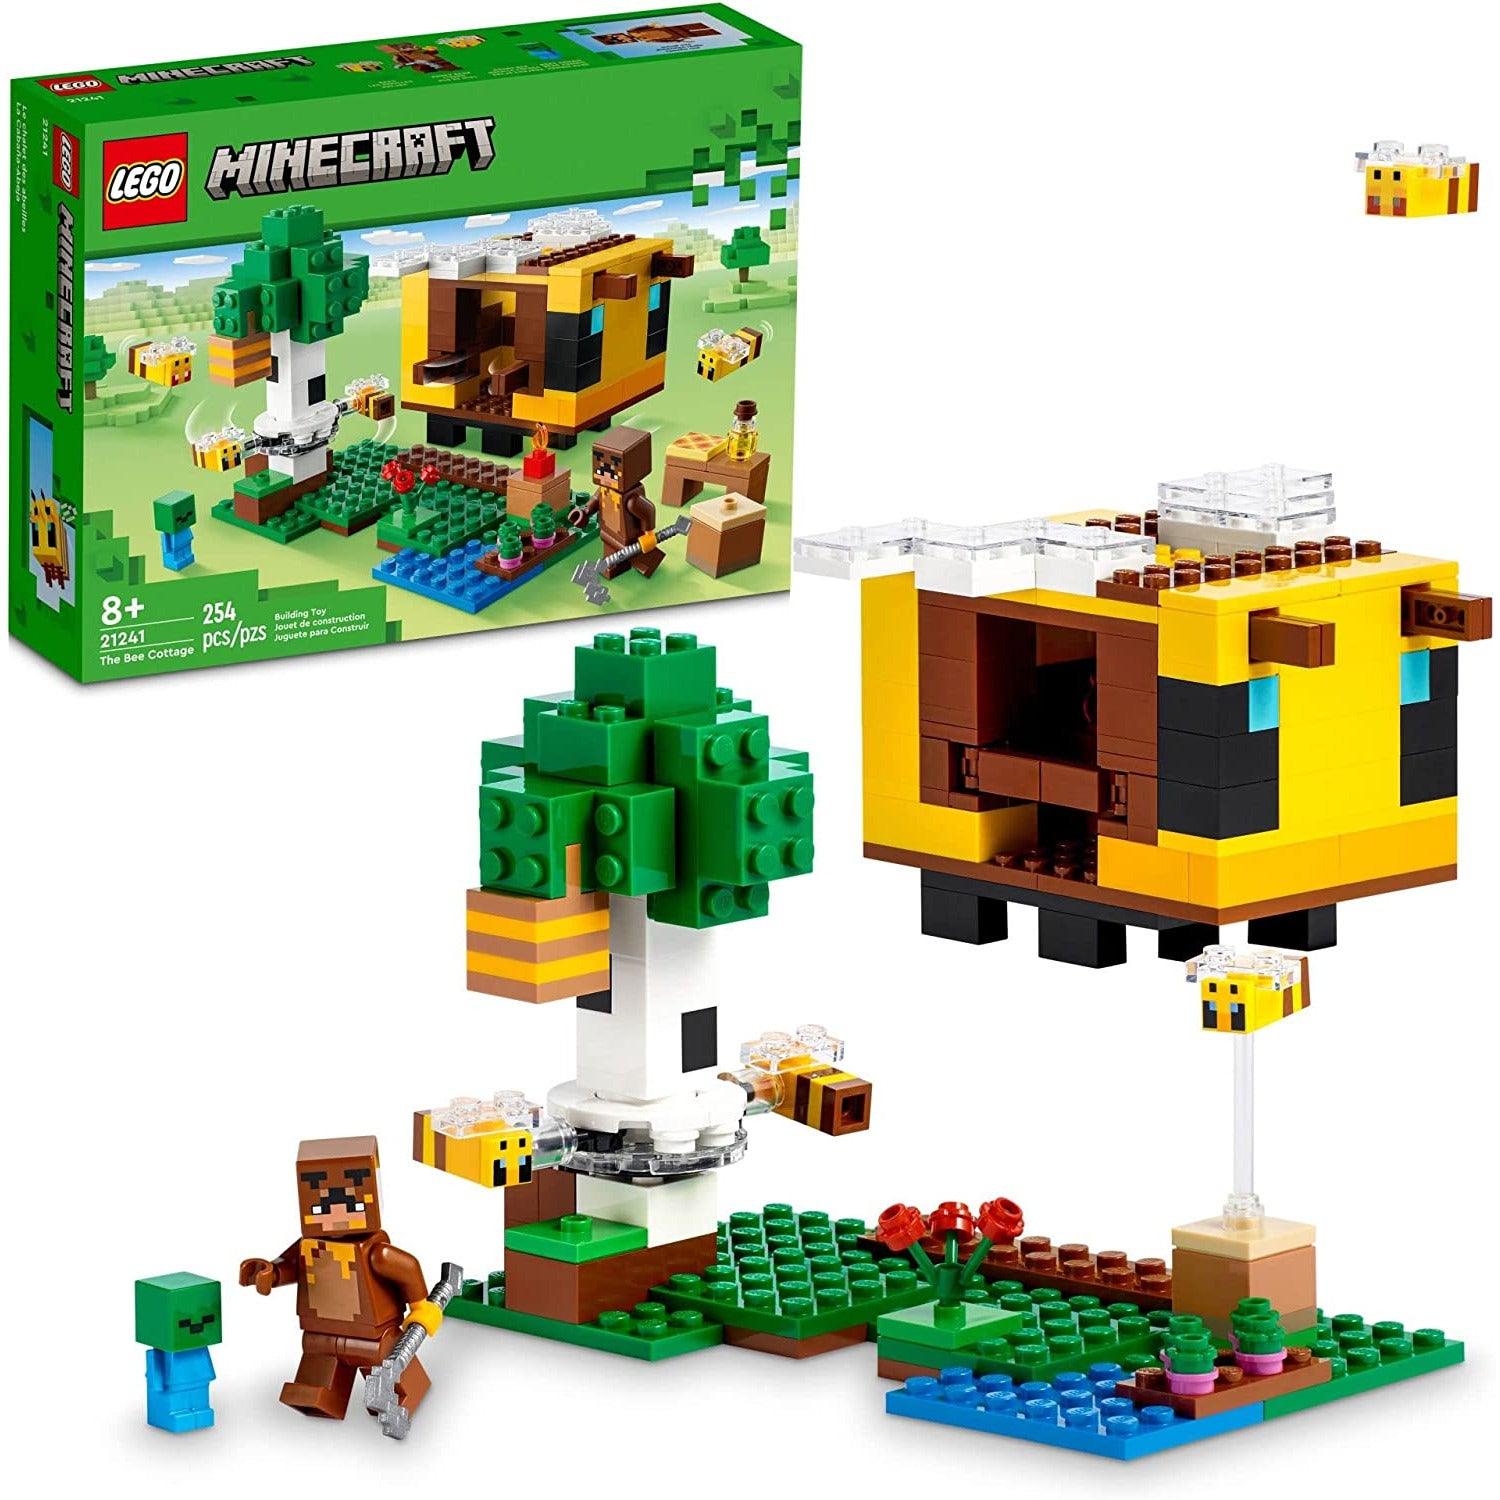 LEGO 21241 Minecraft The Bee Cottage, Construction Toy with Buildable House, Farm, Baby Zombie and Animal Figures